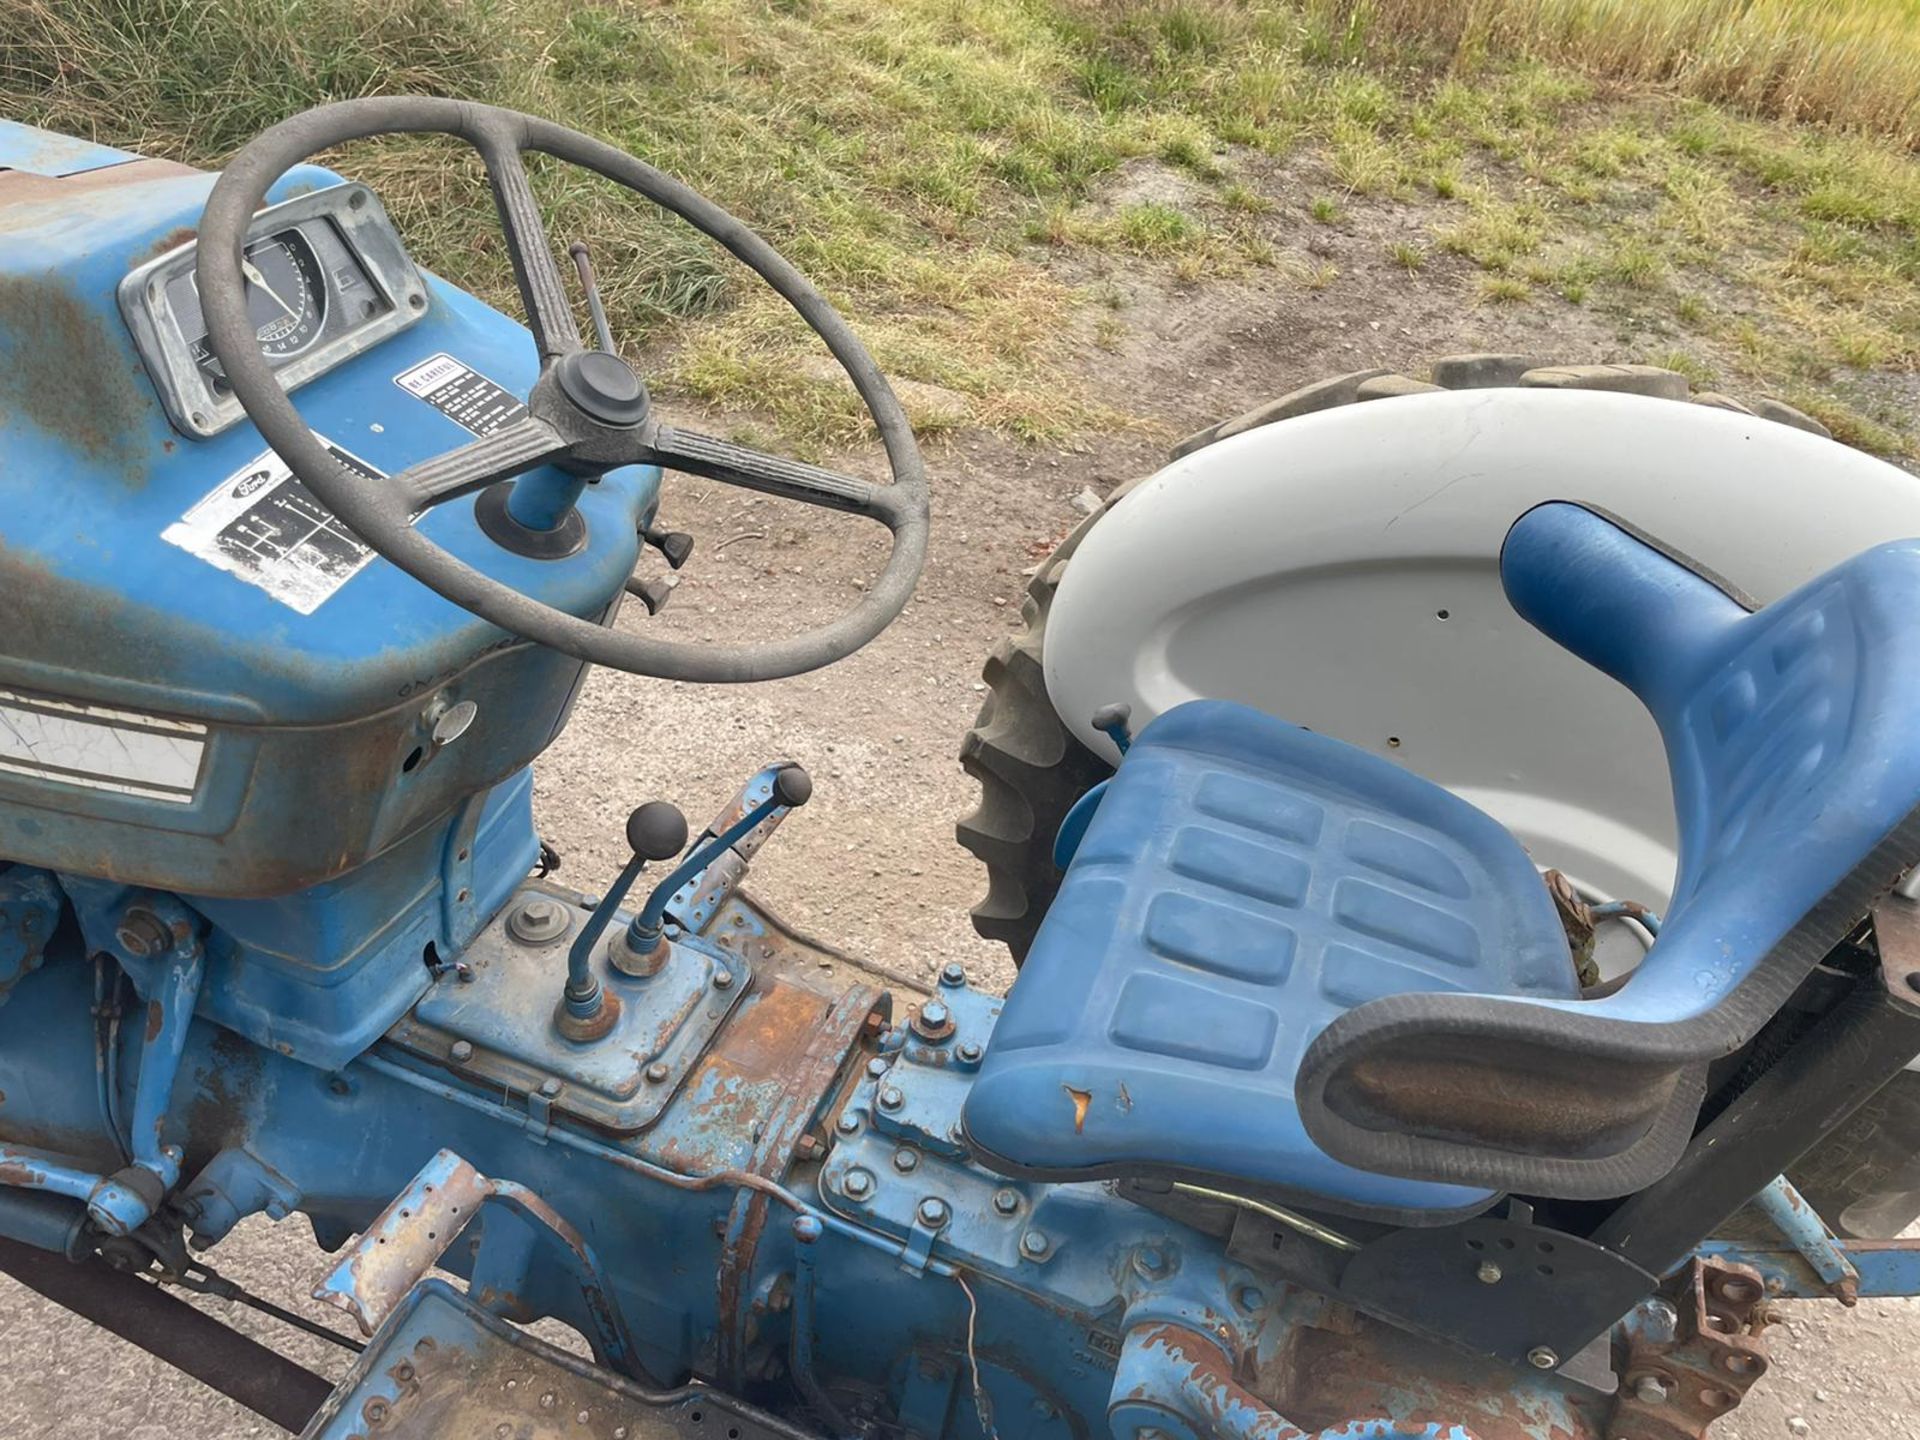 FORD 300 PETROL VINTAGE TRACTOR, RUNS AND DRIVES, SHOWING 2882 HOURS, ALL GEARS WORK *PLUS VAT* - Image 6 of 7